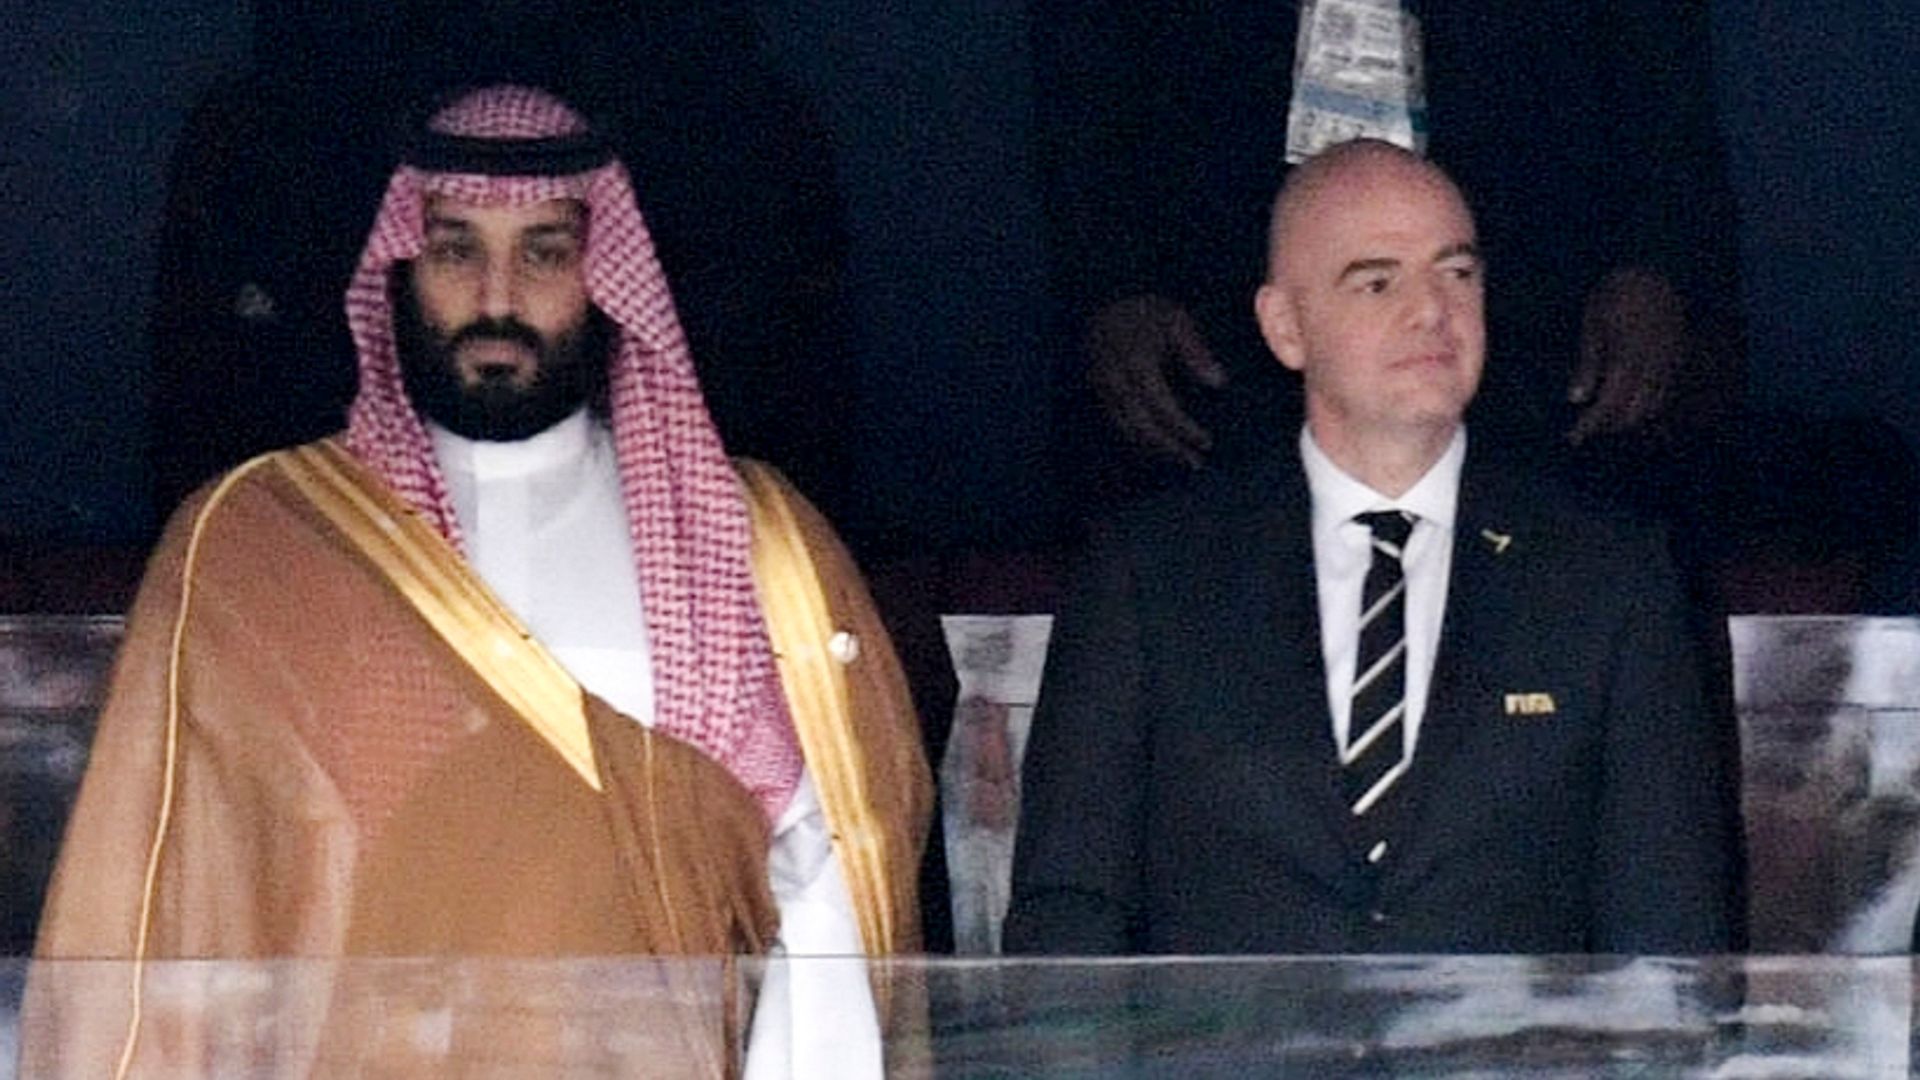 Saudi set to host 2034 World Cup | Amnesty urges human rights commitments